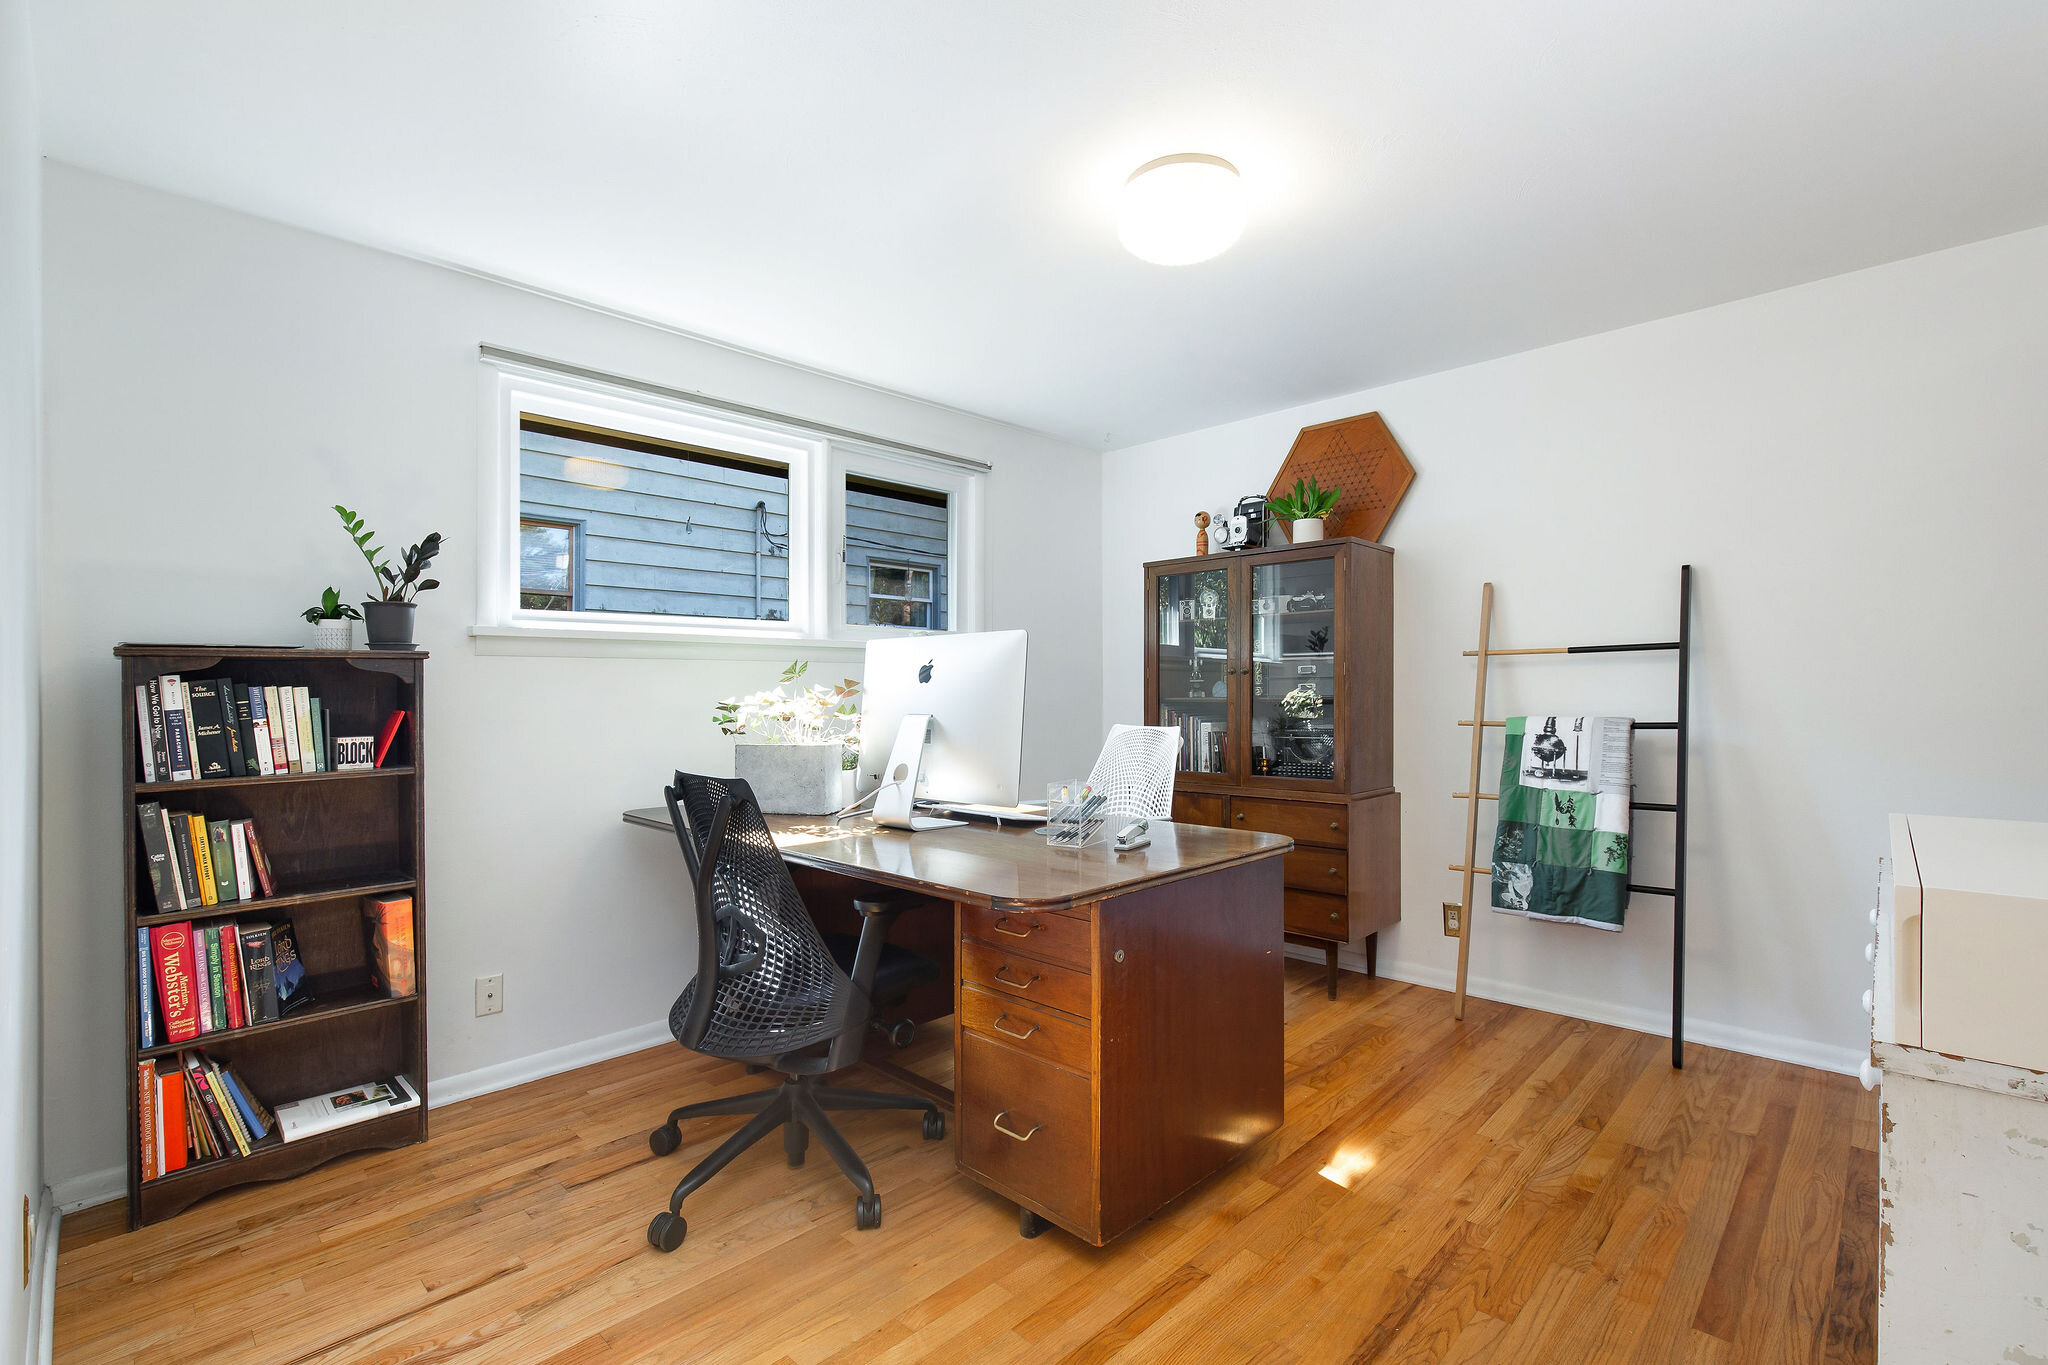  Large second bedroom is the perfect size for a generous home office. The sellers usually have 2 desks in the room that fit comfortably for both of them to work from home. 